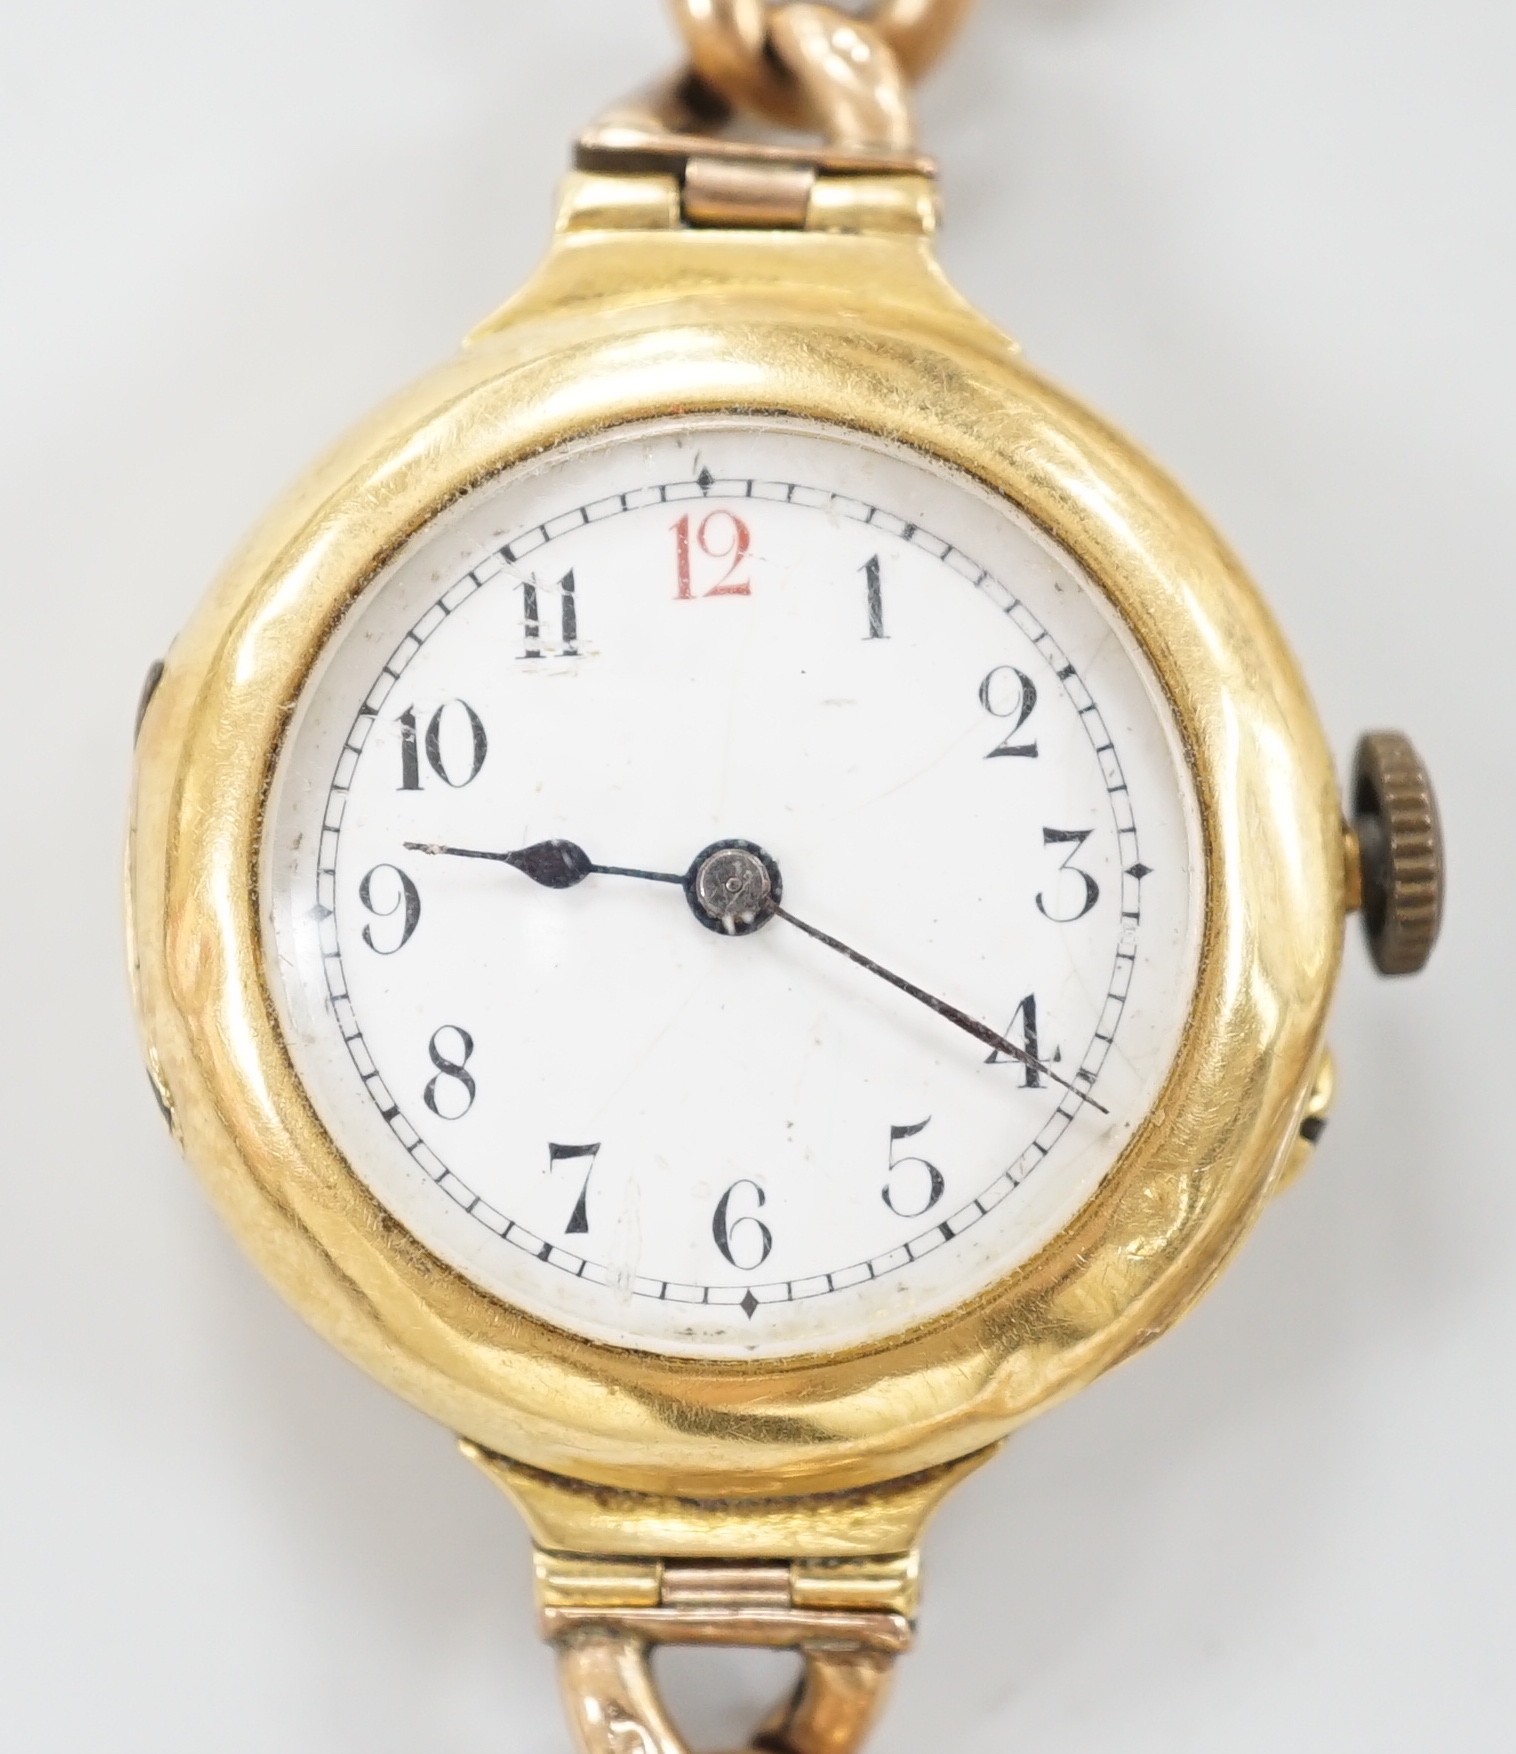 An early 20th century 18ct gold manual wind wrist watch, with Arabic dial, case diameter 27mm, on a yellow metal (stamped 15) curblink bracelet